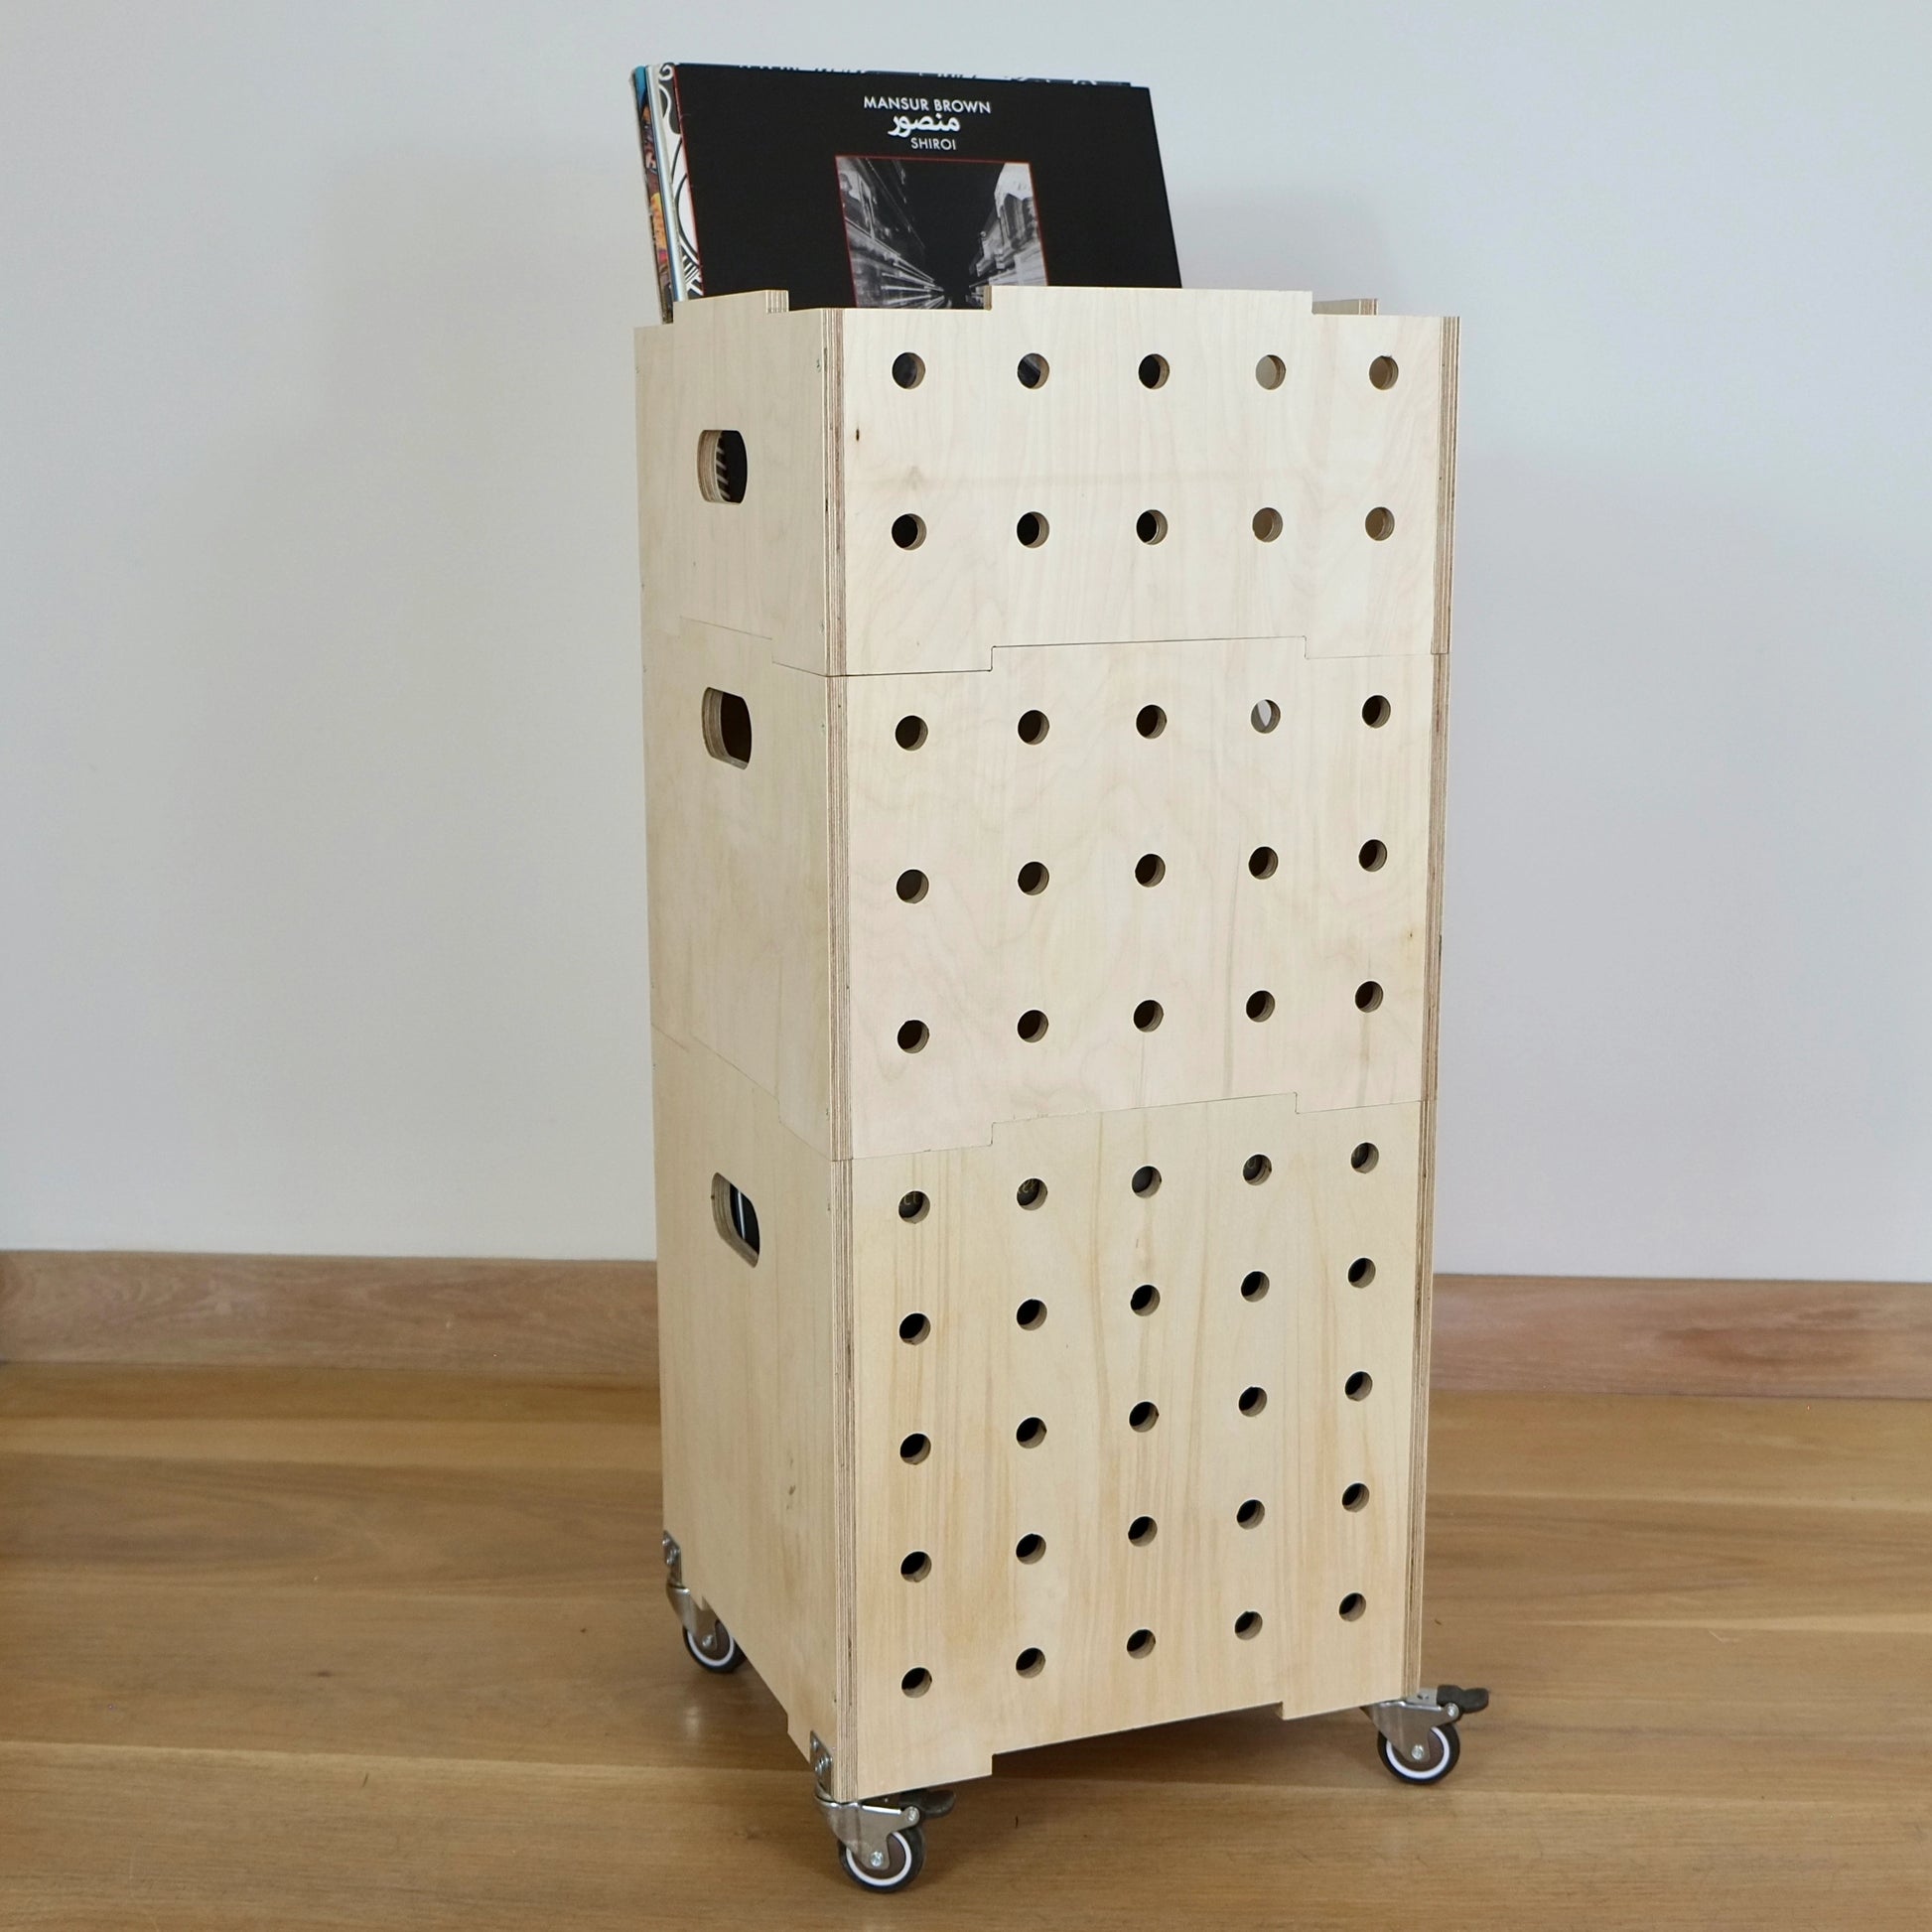 A stack of three modern plywood square shaped storage crates, faces diagonally to the right and sits on a wooden floor. There are ten rows of holes cut in the front facet, it has castors and displays records in the top crate.